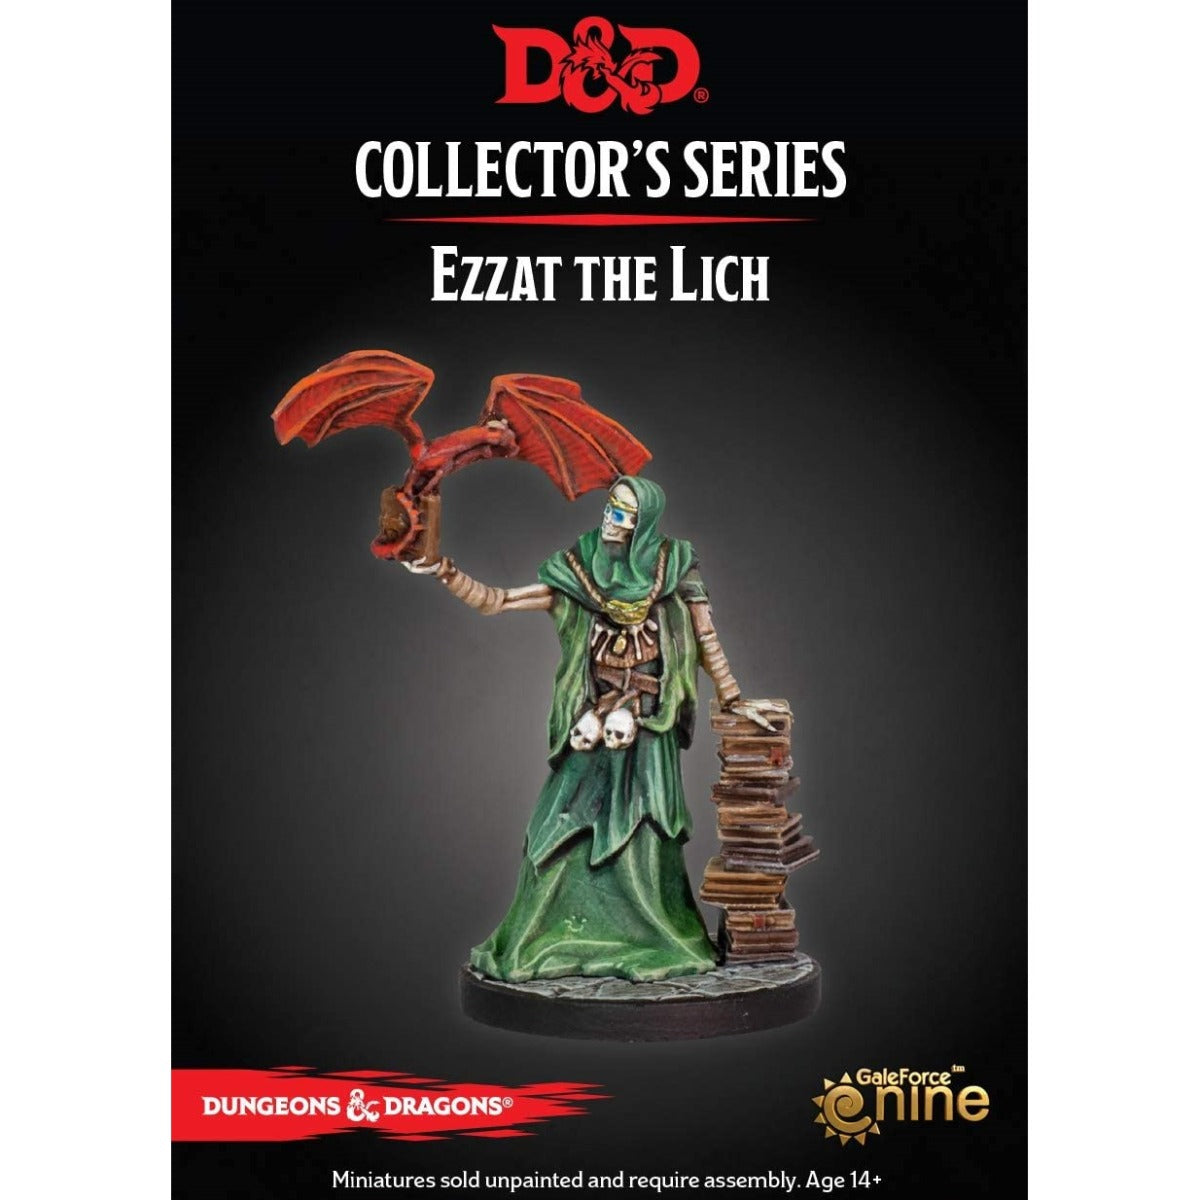 D&D Collectors Series Miniatures Waterdeep Dungeon of the Mad Mage Ezzat the Lich